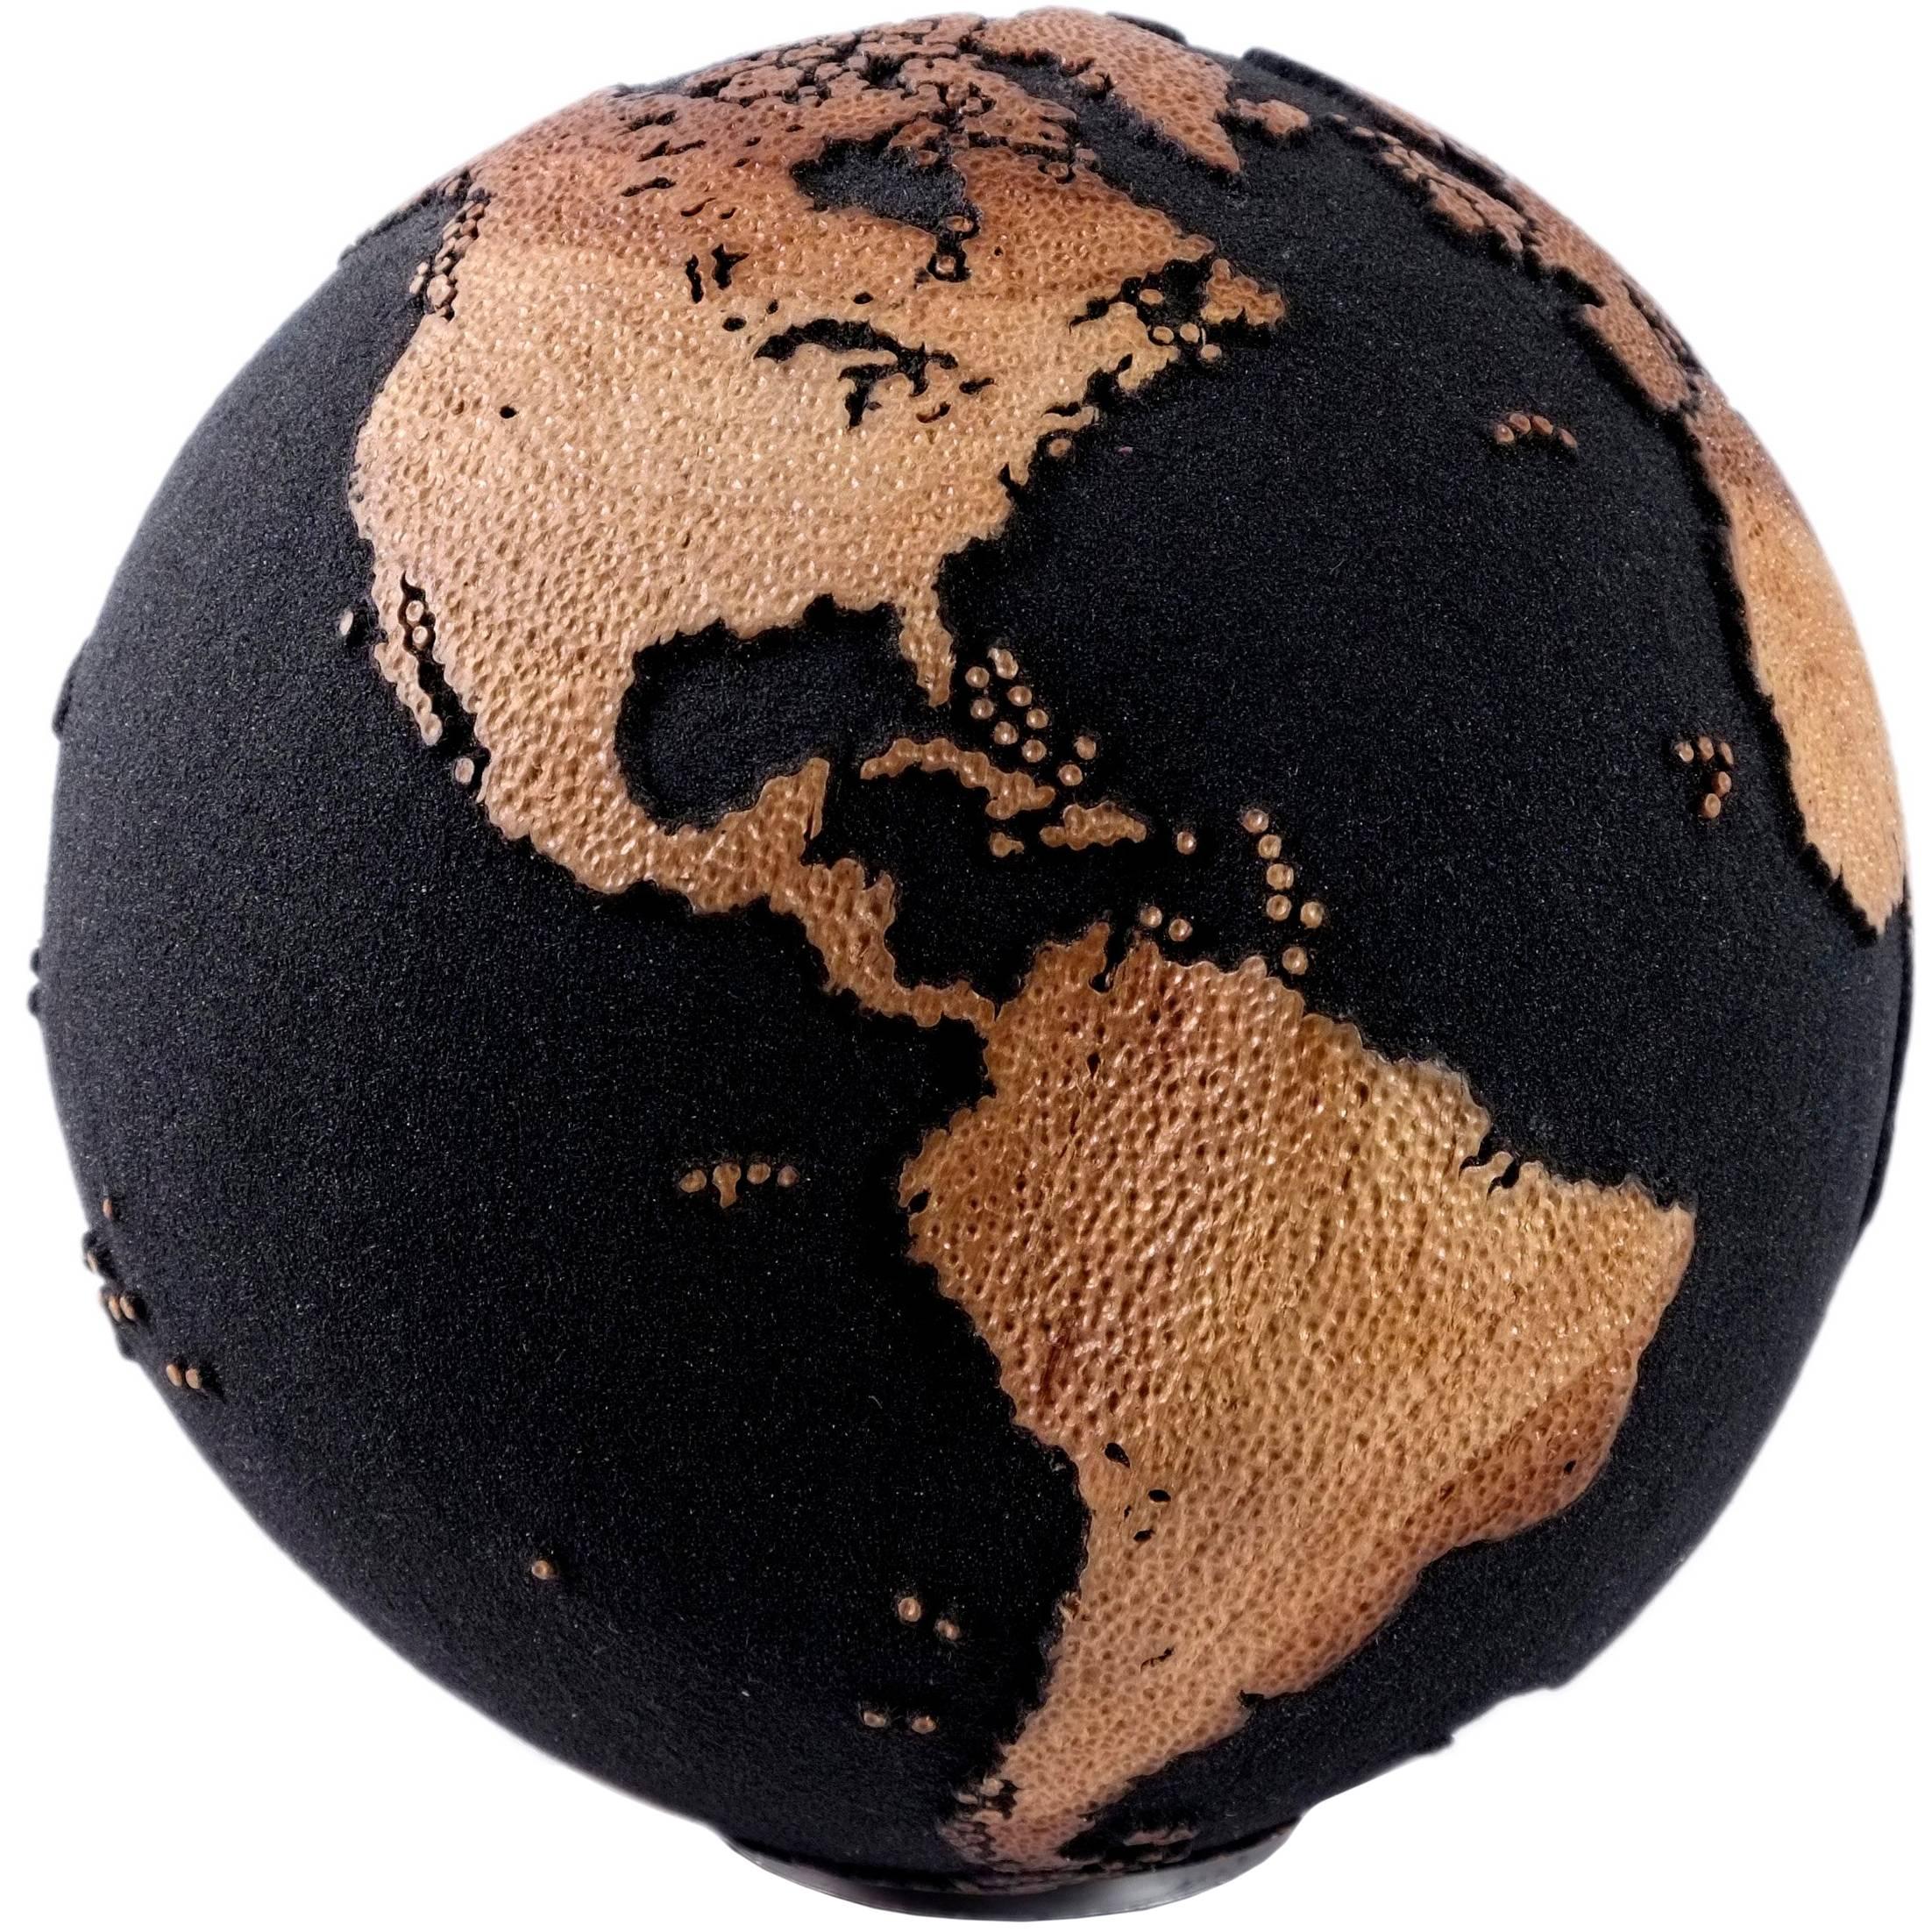 Volcanic Sand Globe with Hammered Skin Textured Continents, 25 cm, Saturday Sale For Sale